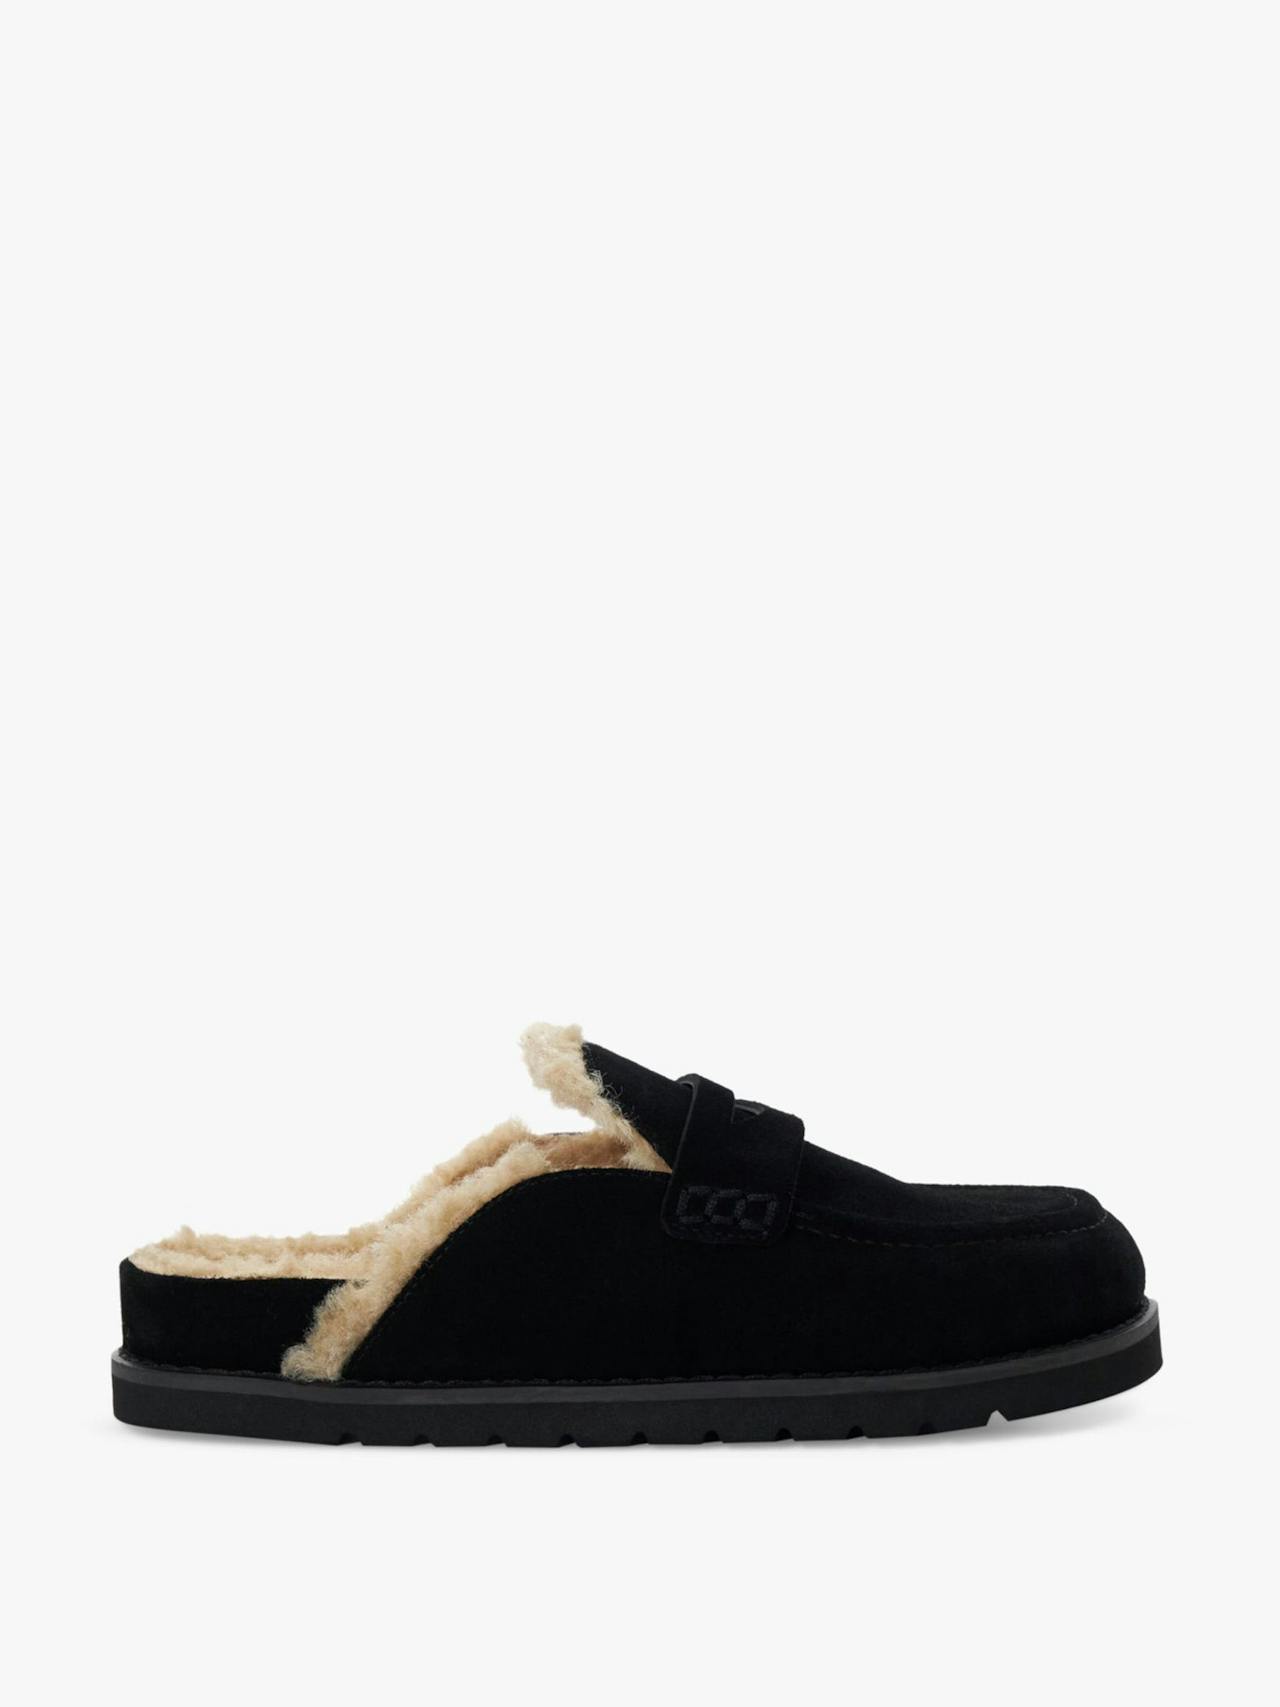 Goldy suede shearling lined backless mules